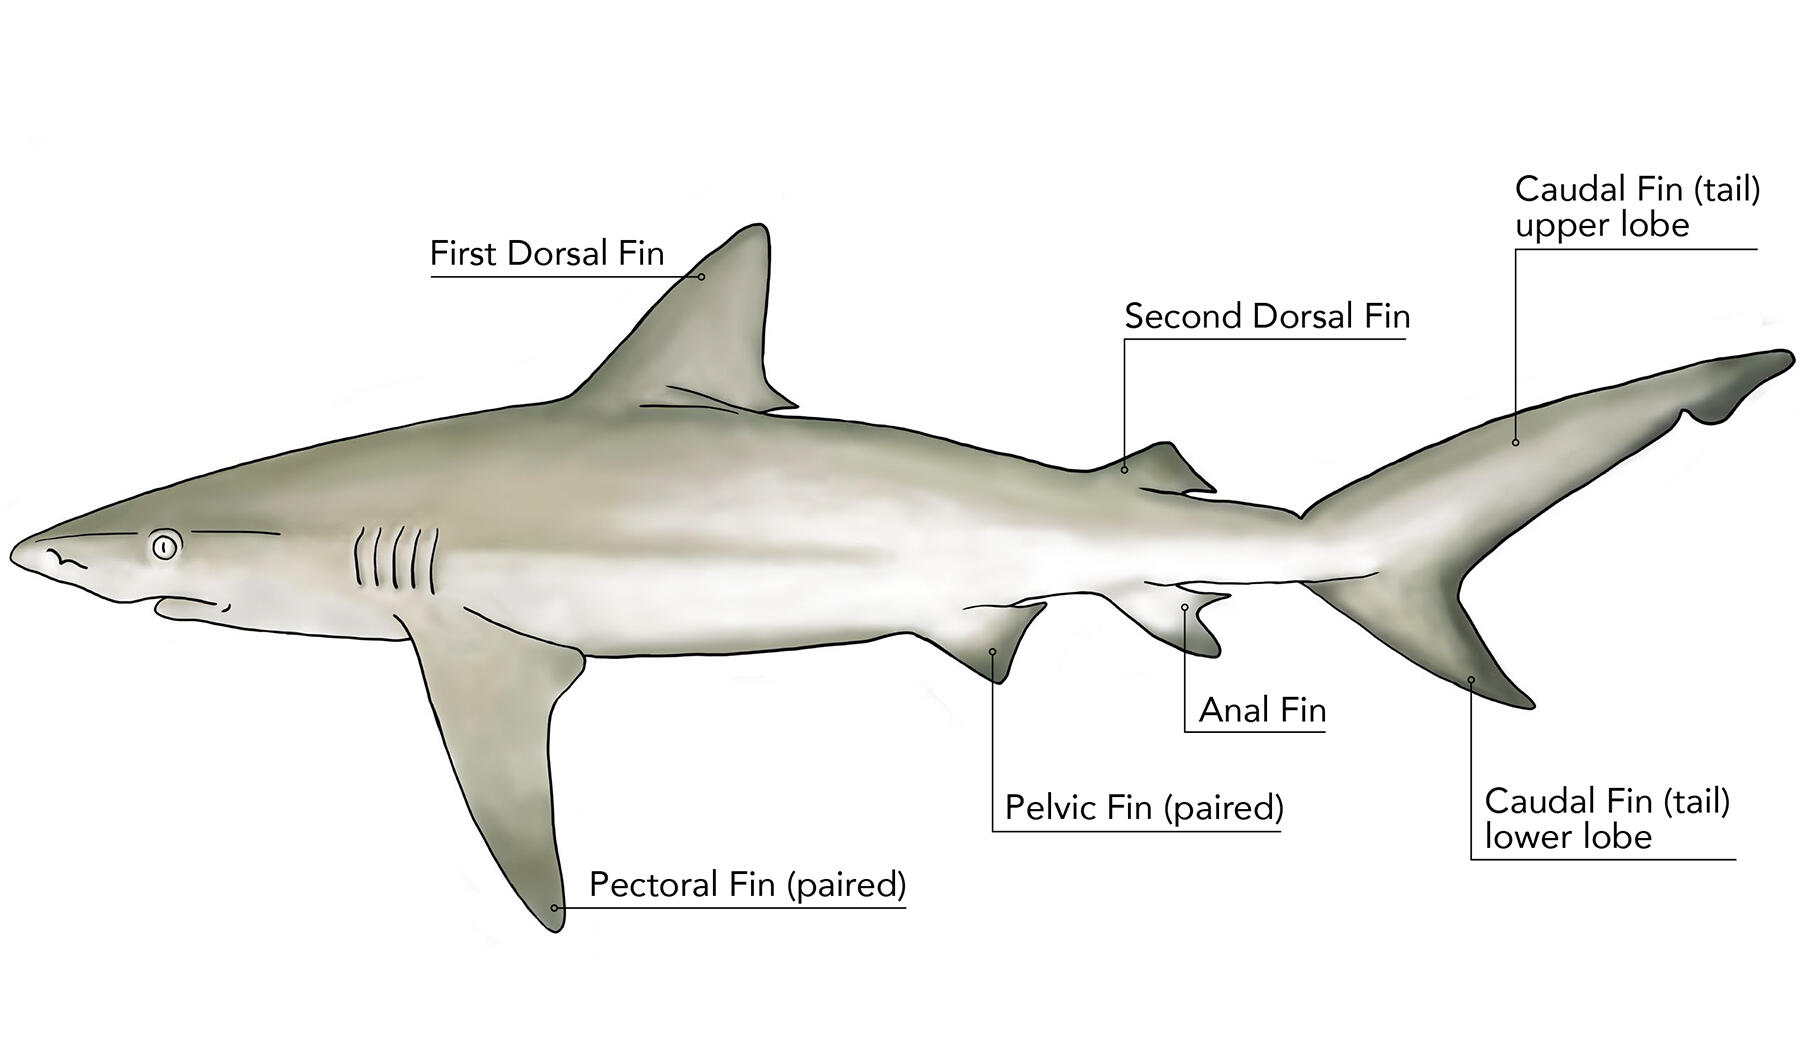 Illustration of a shark with text on top &quot;First Dorsal Fin, Second Dorsal Fin, Caudal Fin (tail) upper lobe&quot; on bottom &quot;Pectoral Fin (paired), Pelvic Fin (paired), Anal Fin, Caudal Fin (tail) lower lobe&quot;.